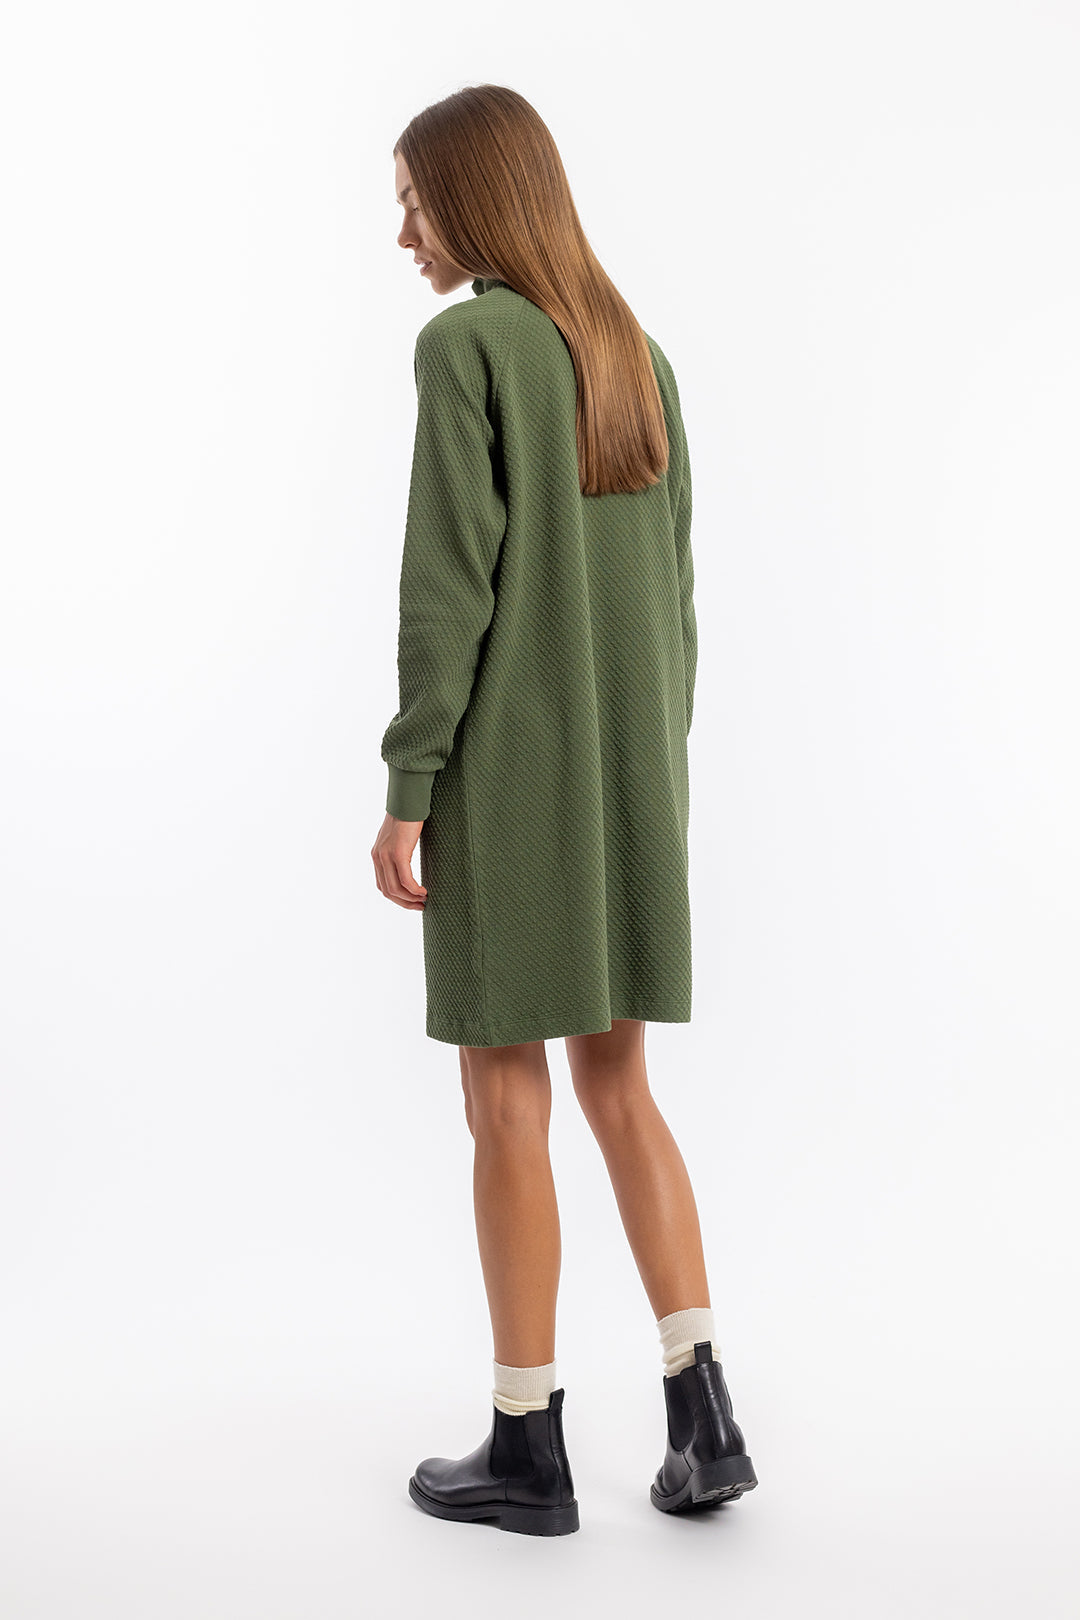 Green sweatshirt dress made from 100% organic cotton from Rotholz